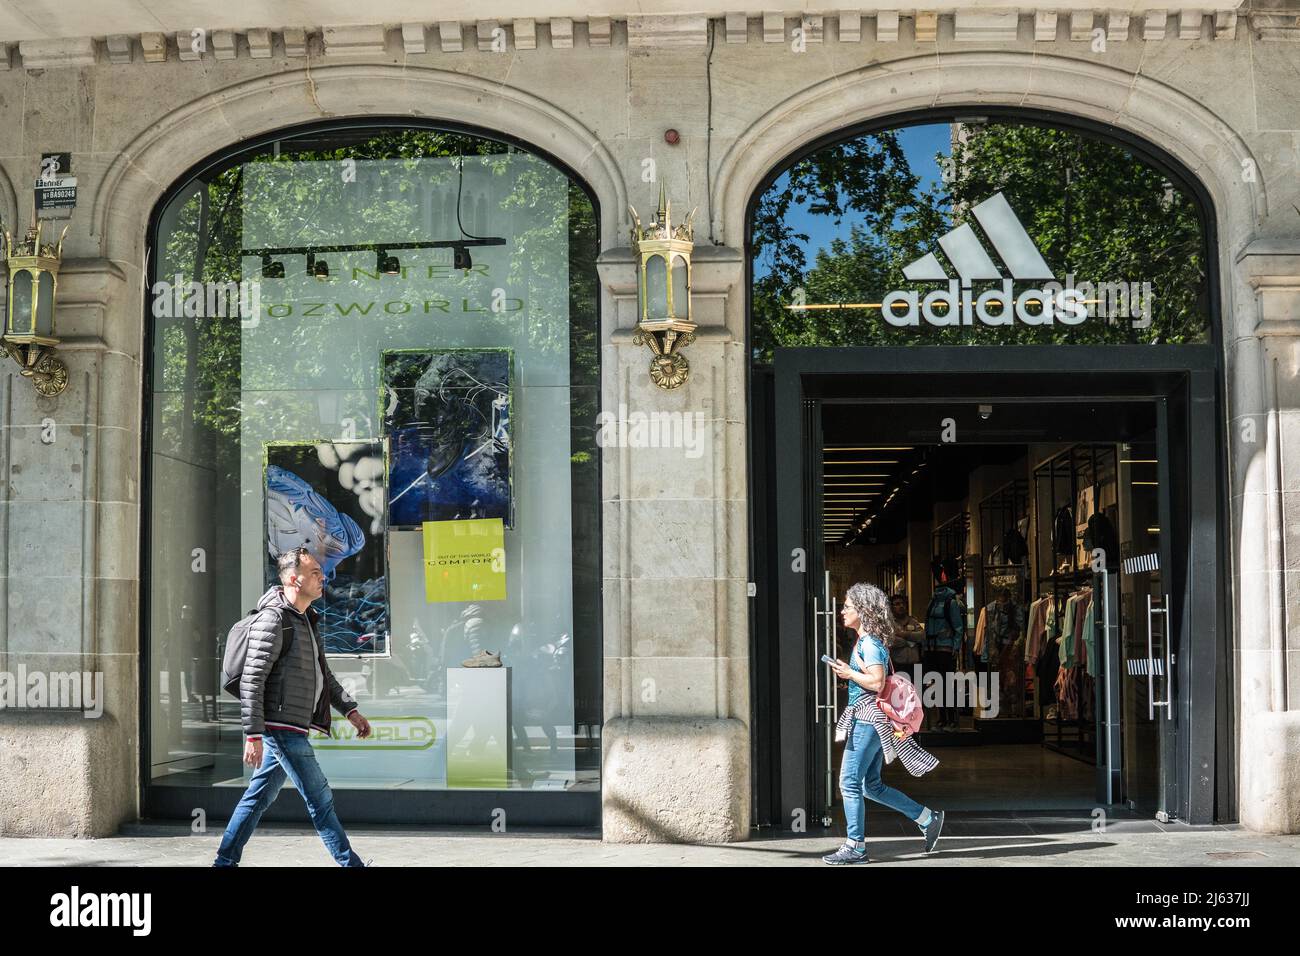 Pedestrians walk past the German multinational sport clothing brand Adidas  store in Barcelona Stock Photo - Alamy